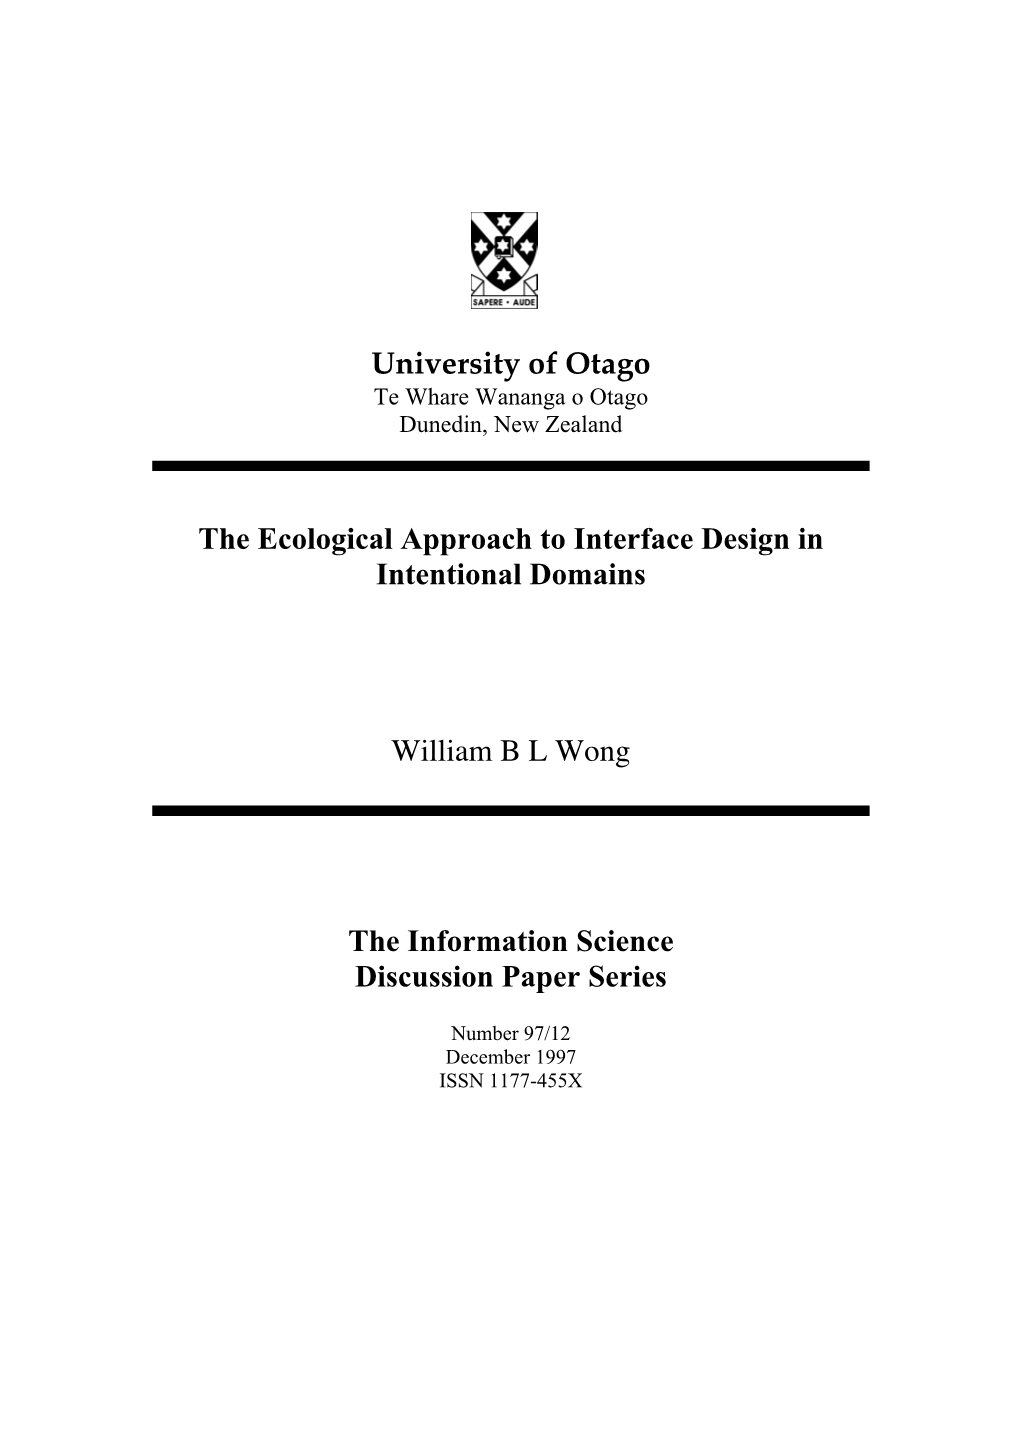 University of Otago the Ecological Approach to Interface Design In